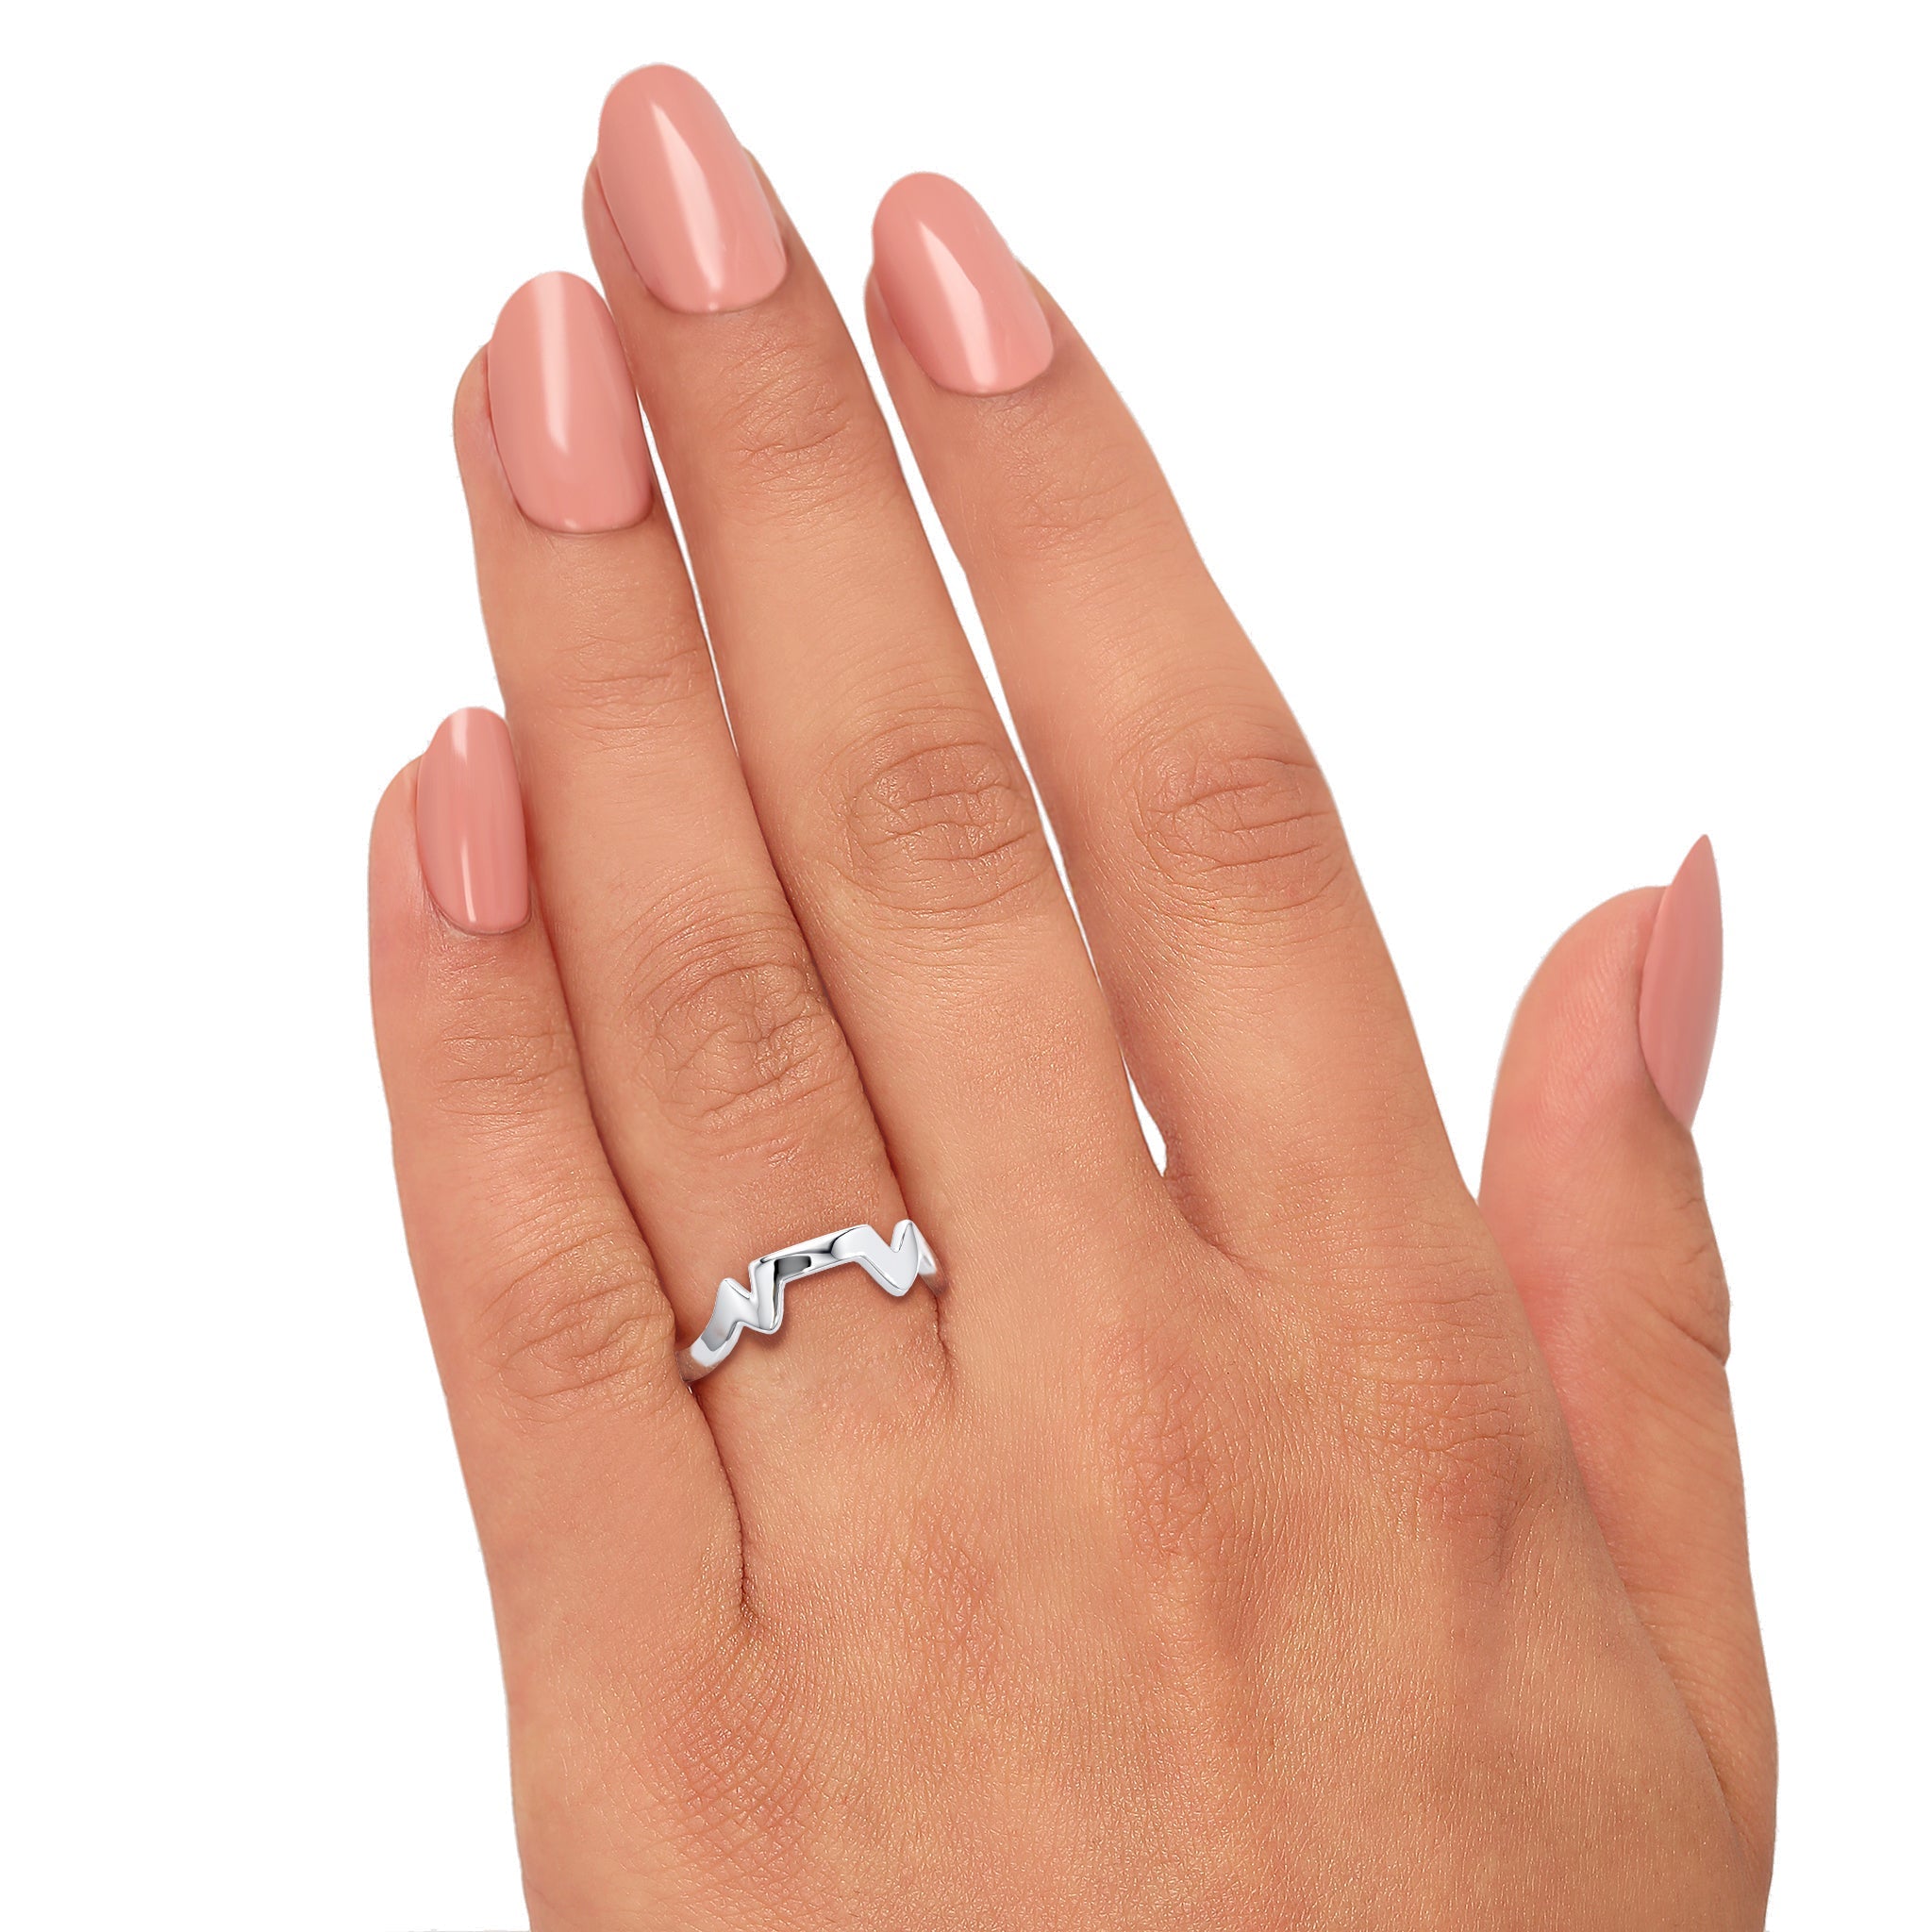 Shimansky - Women Wearing the Table Mountain Ring Crafted in 14K White Gold